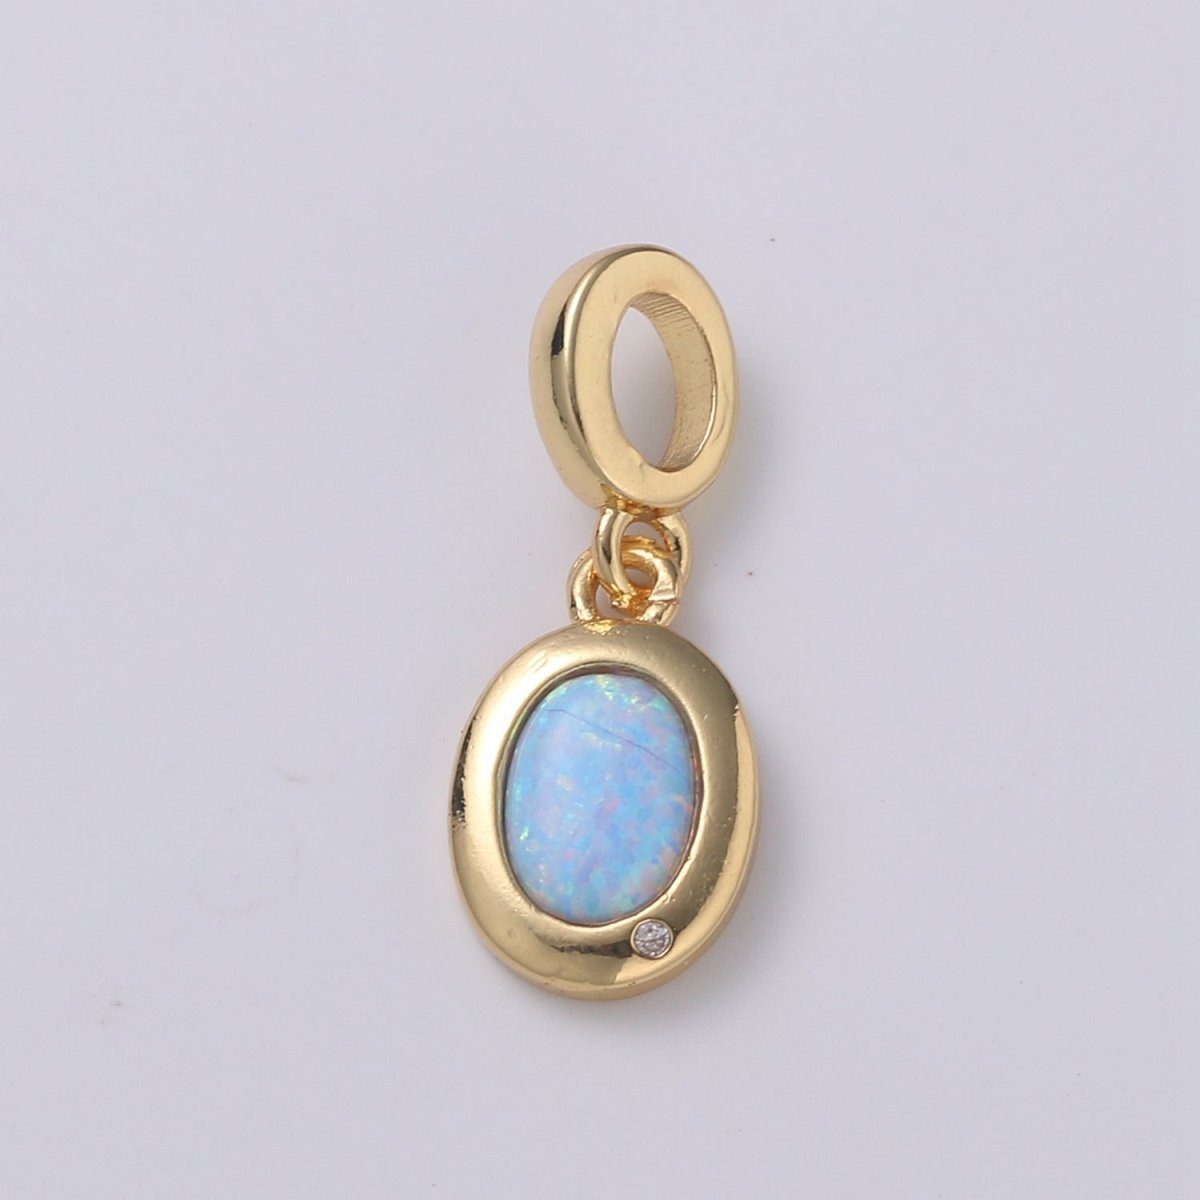 Dainty Solitaire Pendant 14K Gold Filled Oval Pendant for necklace Opal Charm Birthstone Cubic Zirconia Geometriz Bezel Charm H-389 H-390 H-392 H-397 - DLUXCA